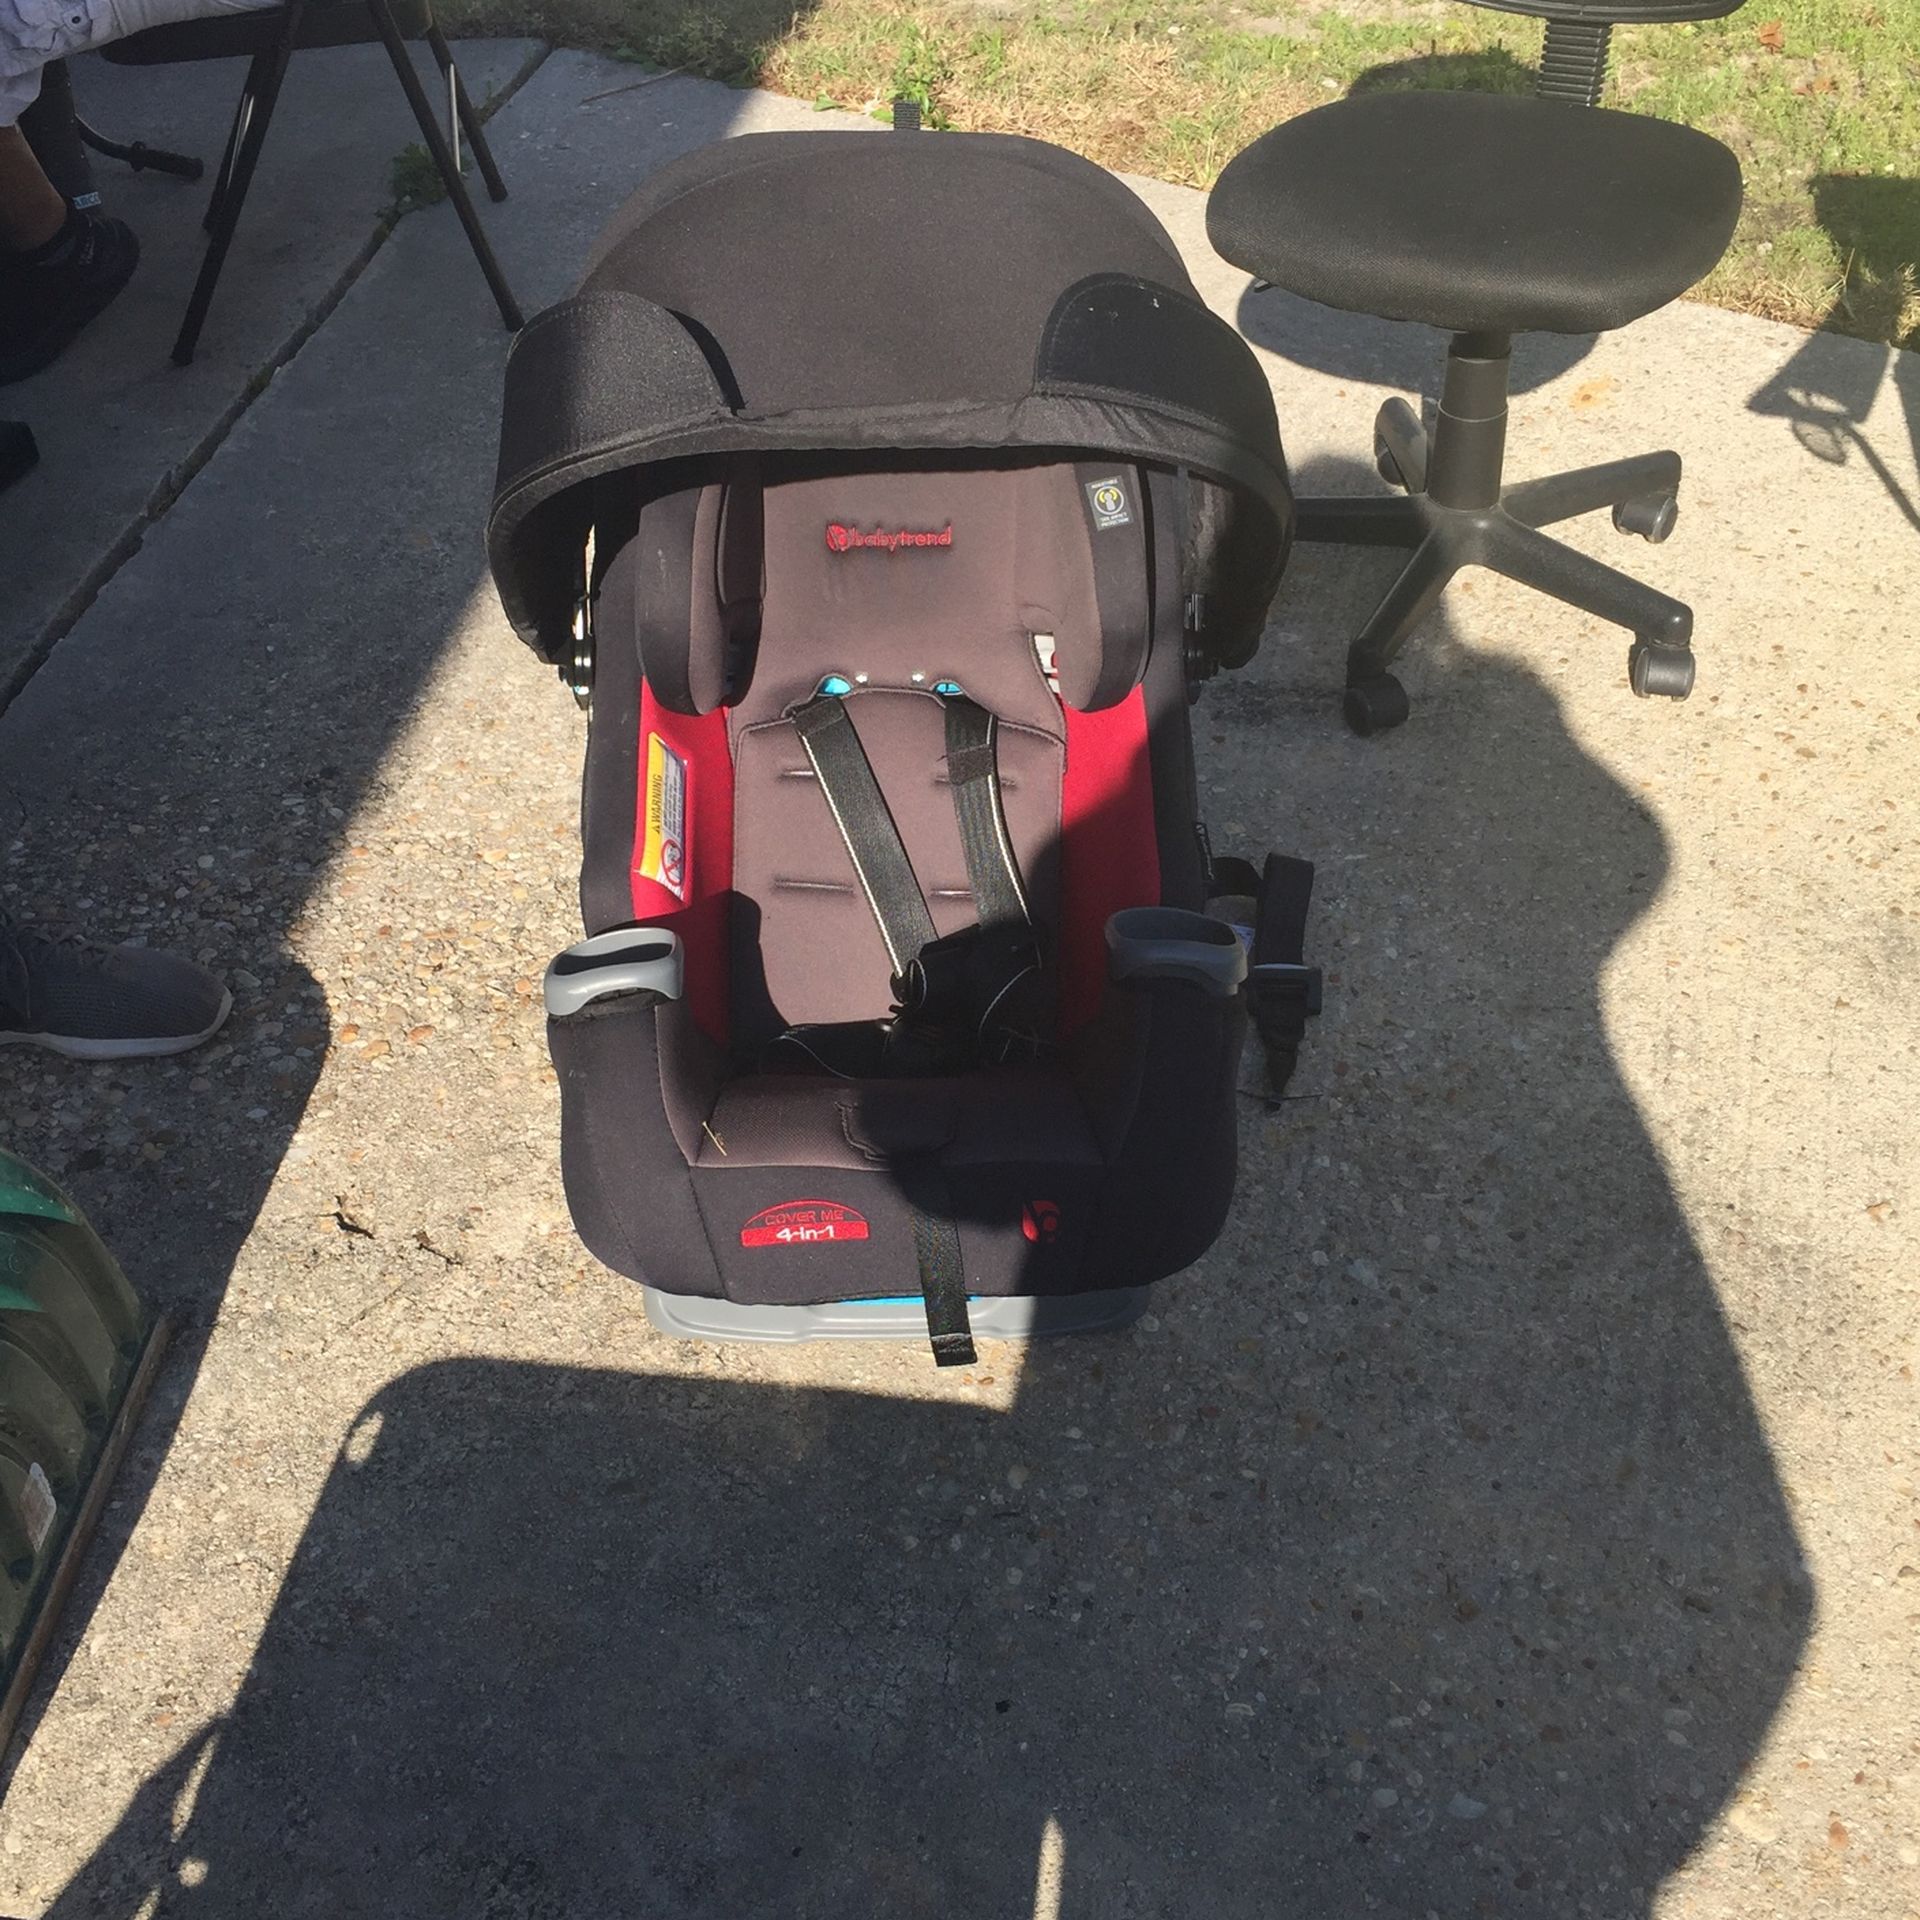 Car seat Four In One Expires 2032  Weight 4 To 100lbs Like New Used Very Ittle Red And Black Baby Trend Adjust Headrest And Reclines Three Positons